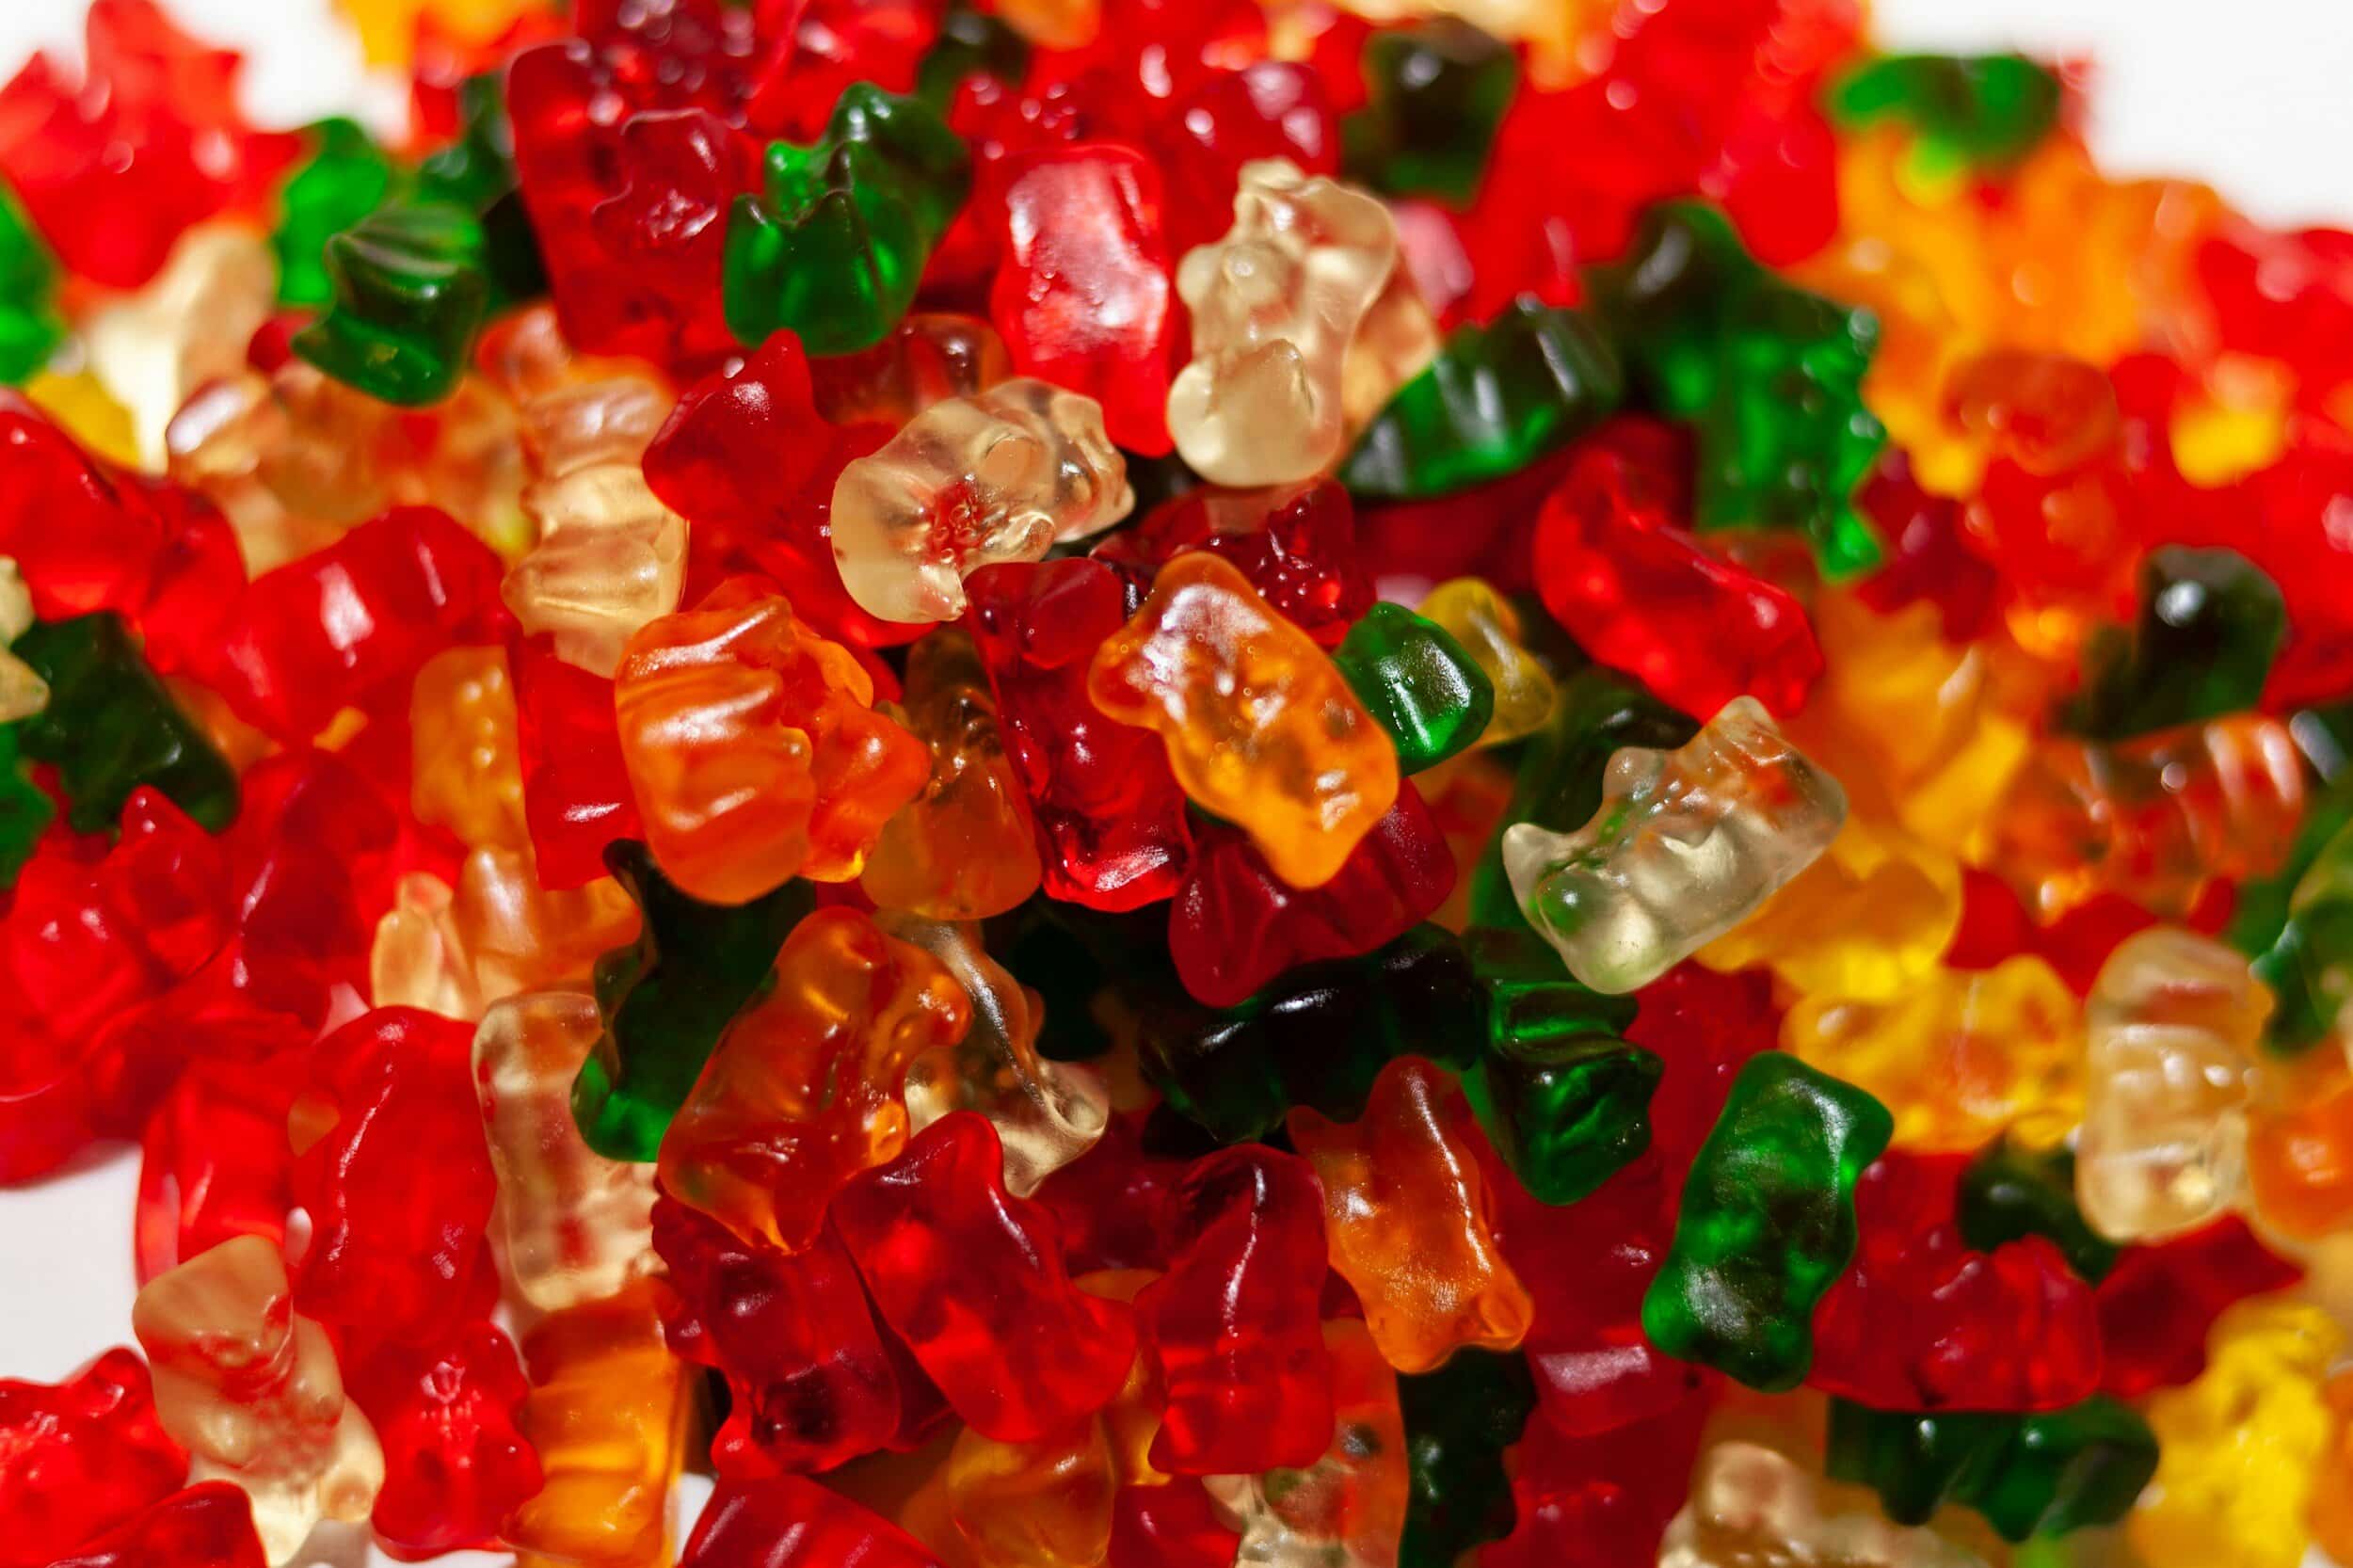 Gummy bears are a great snack to eat during your long runs as the sugars will give you a quick boost! The image shows colorful, tasty looking gummy bears.